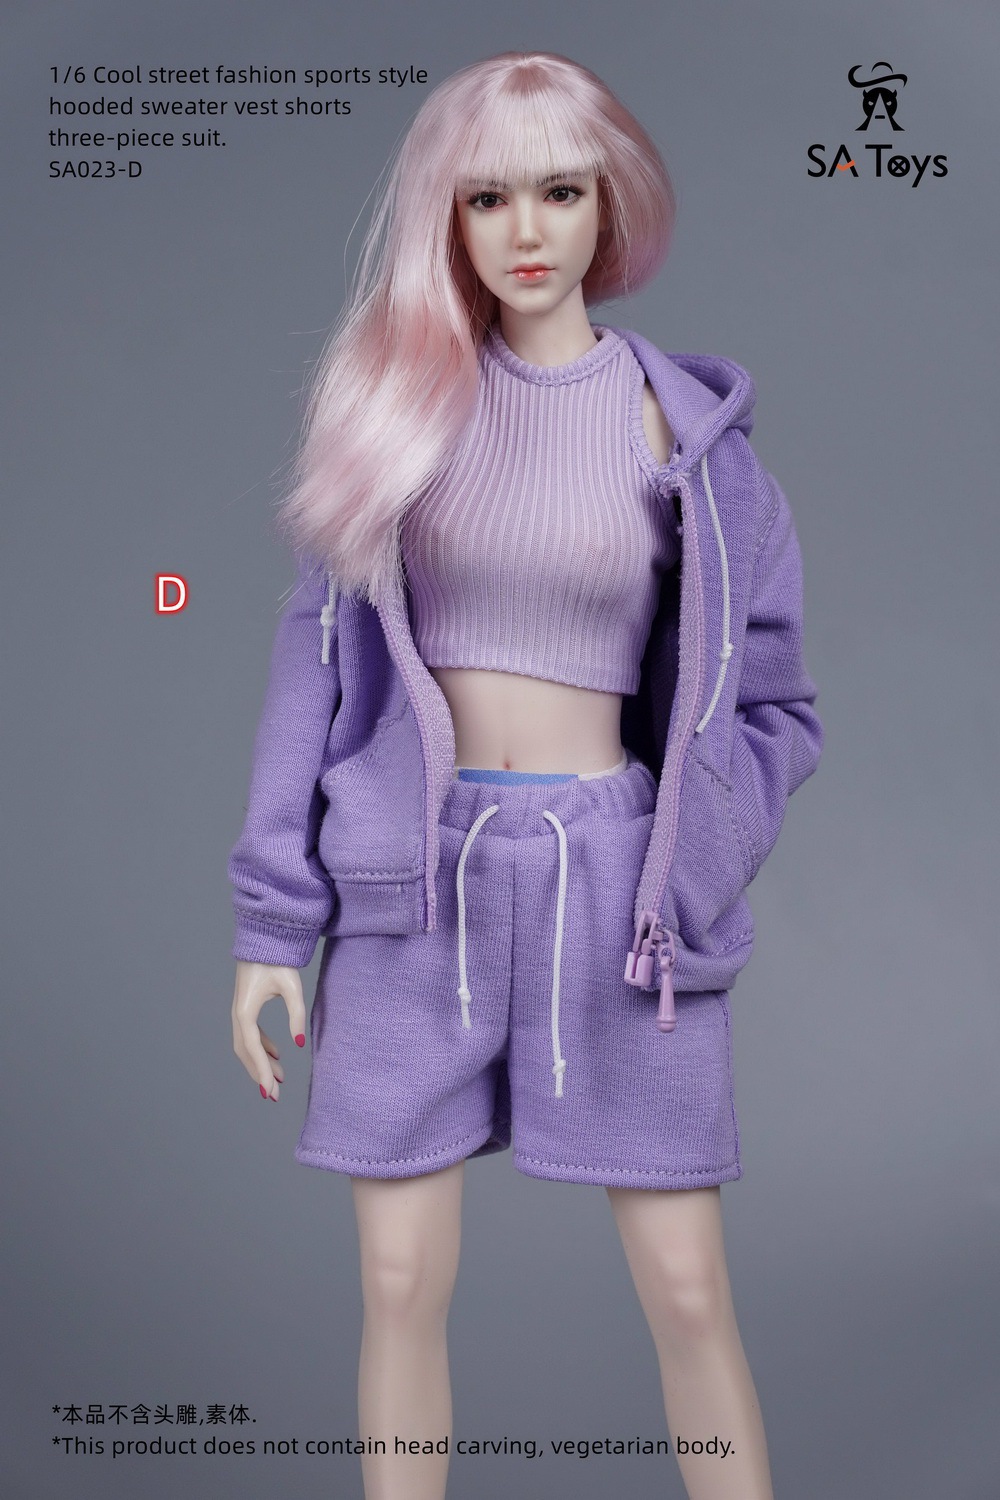 hiphop - NEW PRODUCT: SA Toys: 1/6 hip skirt / floral elastic skirt / fashionable sports style hooded sweater cover, hip-hop fisherman hat halter and footwear casual pants [variety optional] 17020310